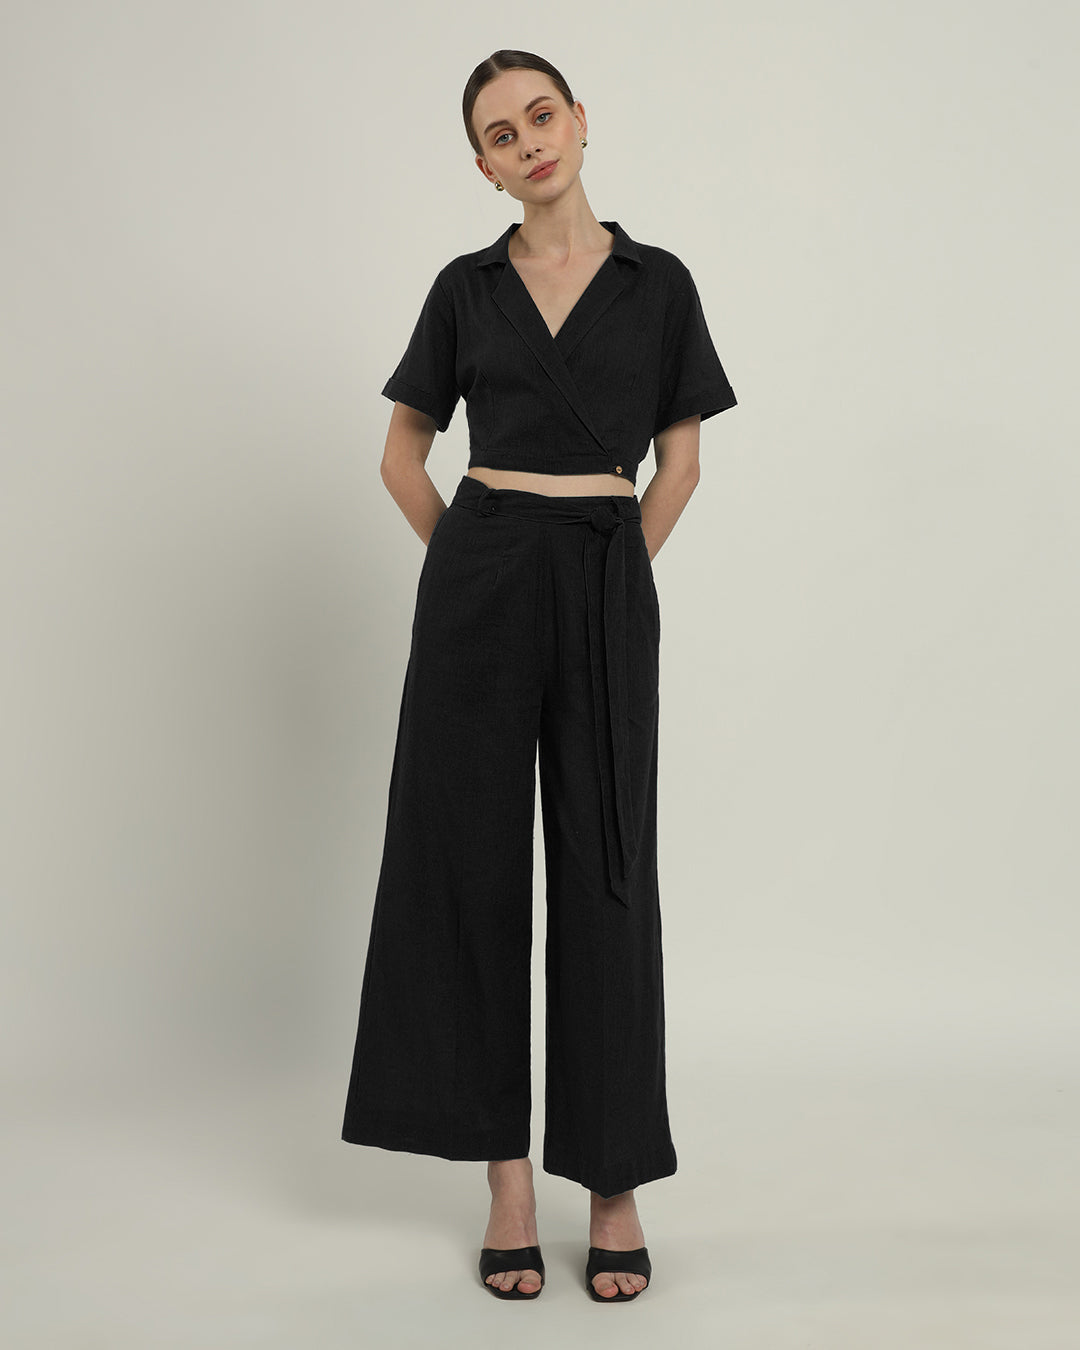 Noir Lapel Collar Solid Top (Without Bottoms)